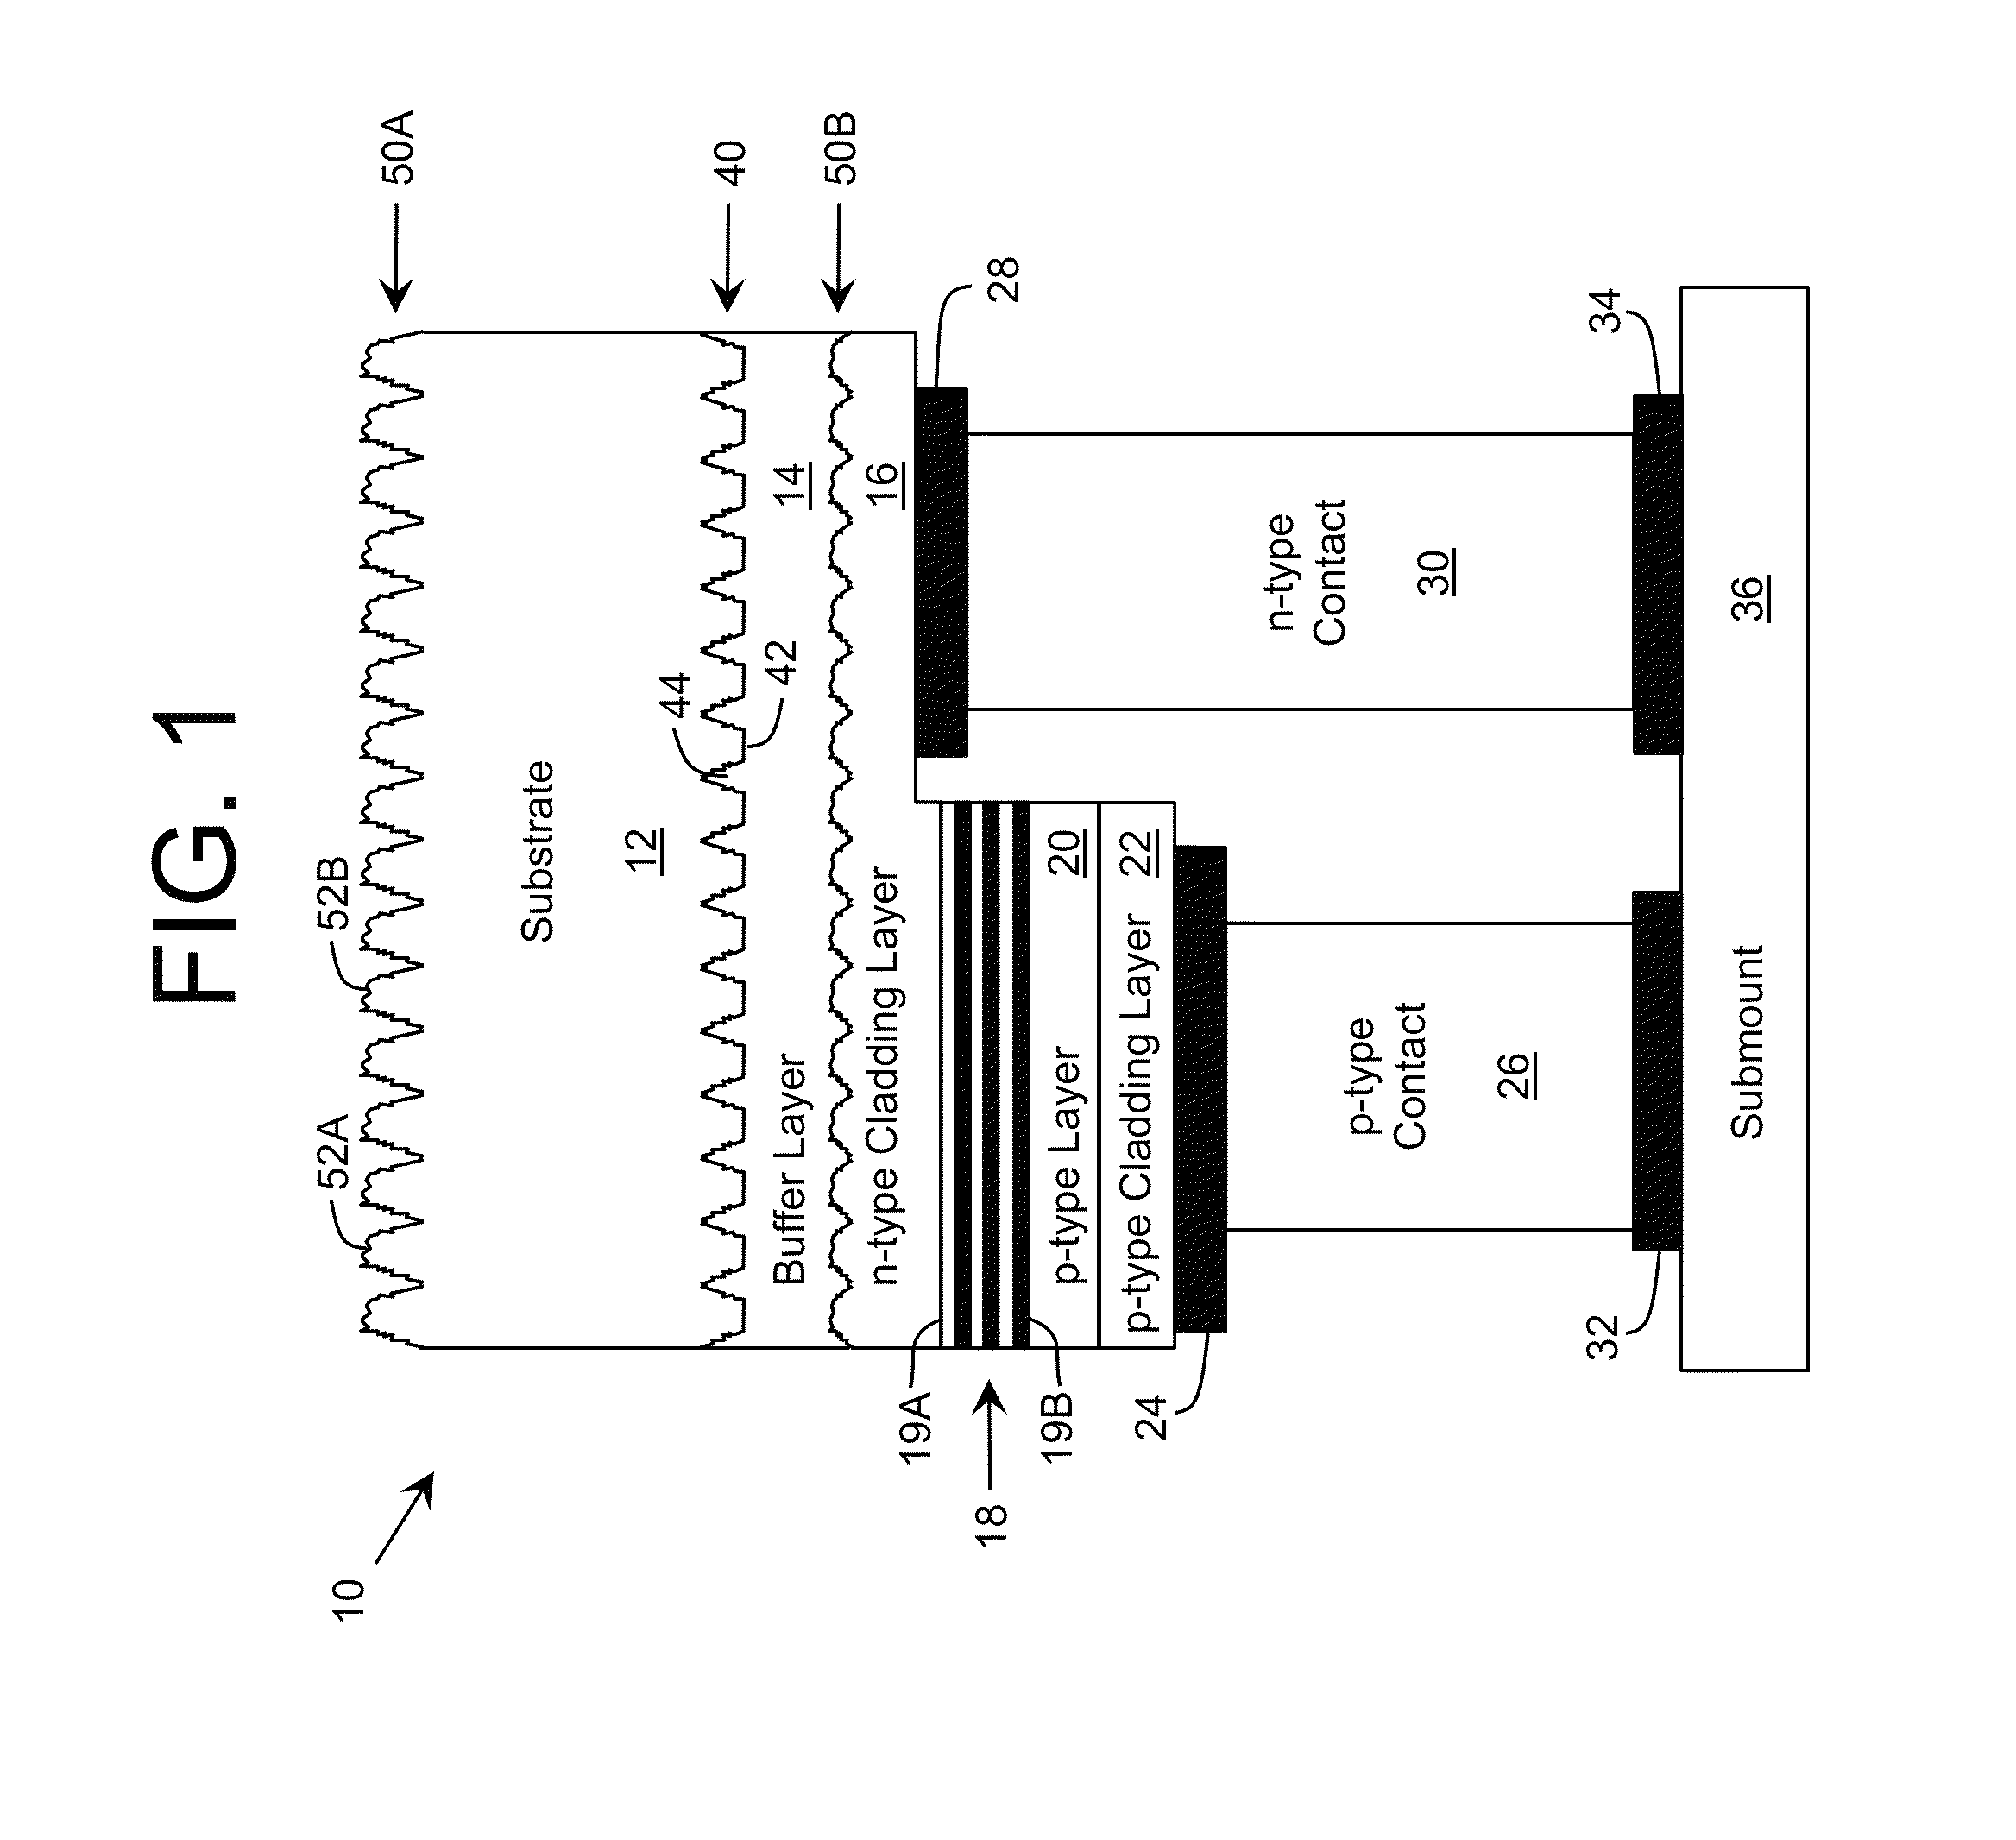 Patterned substrate design for layer growth